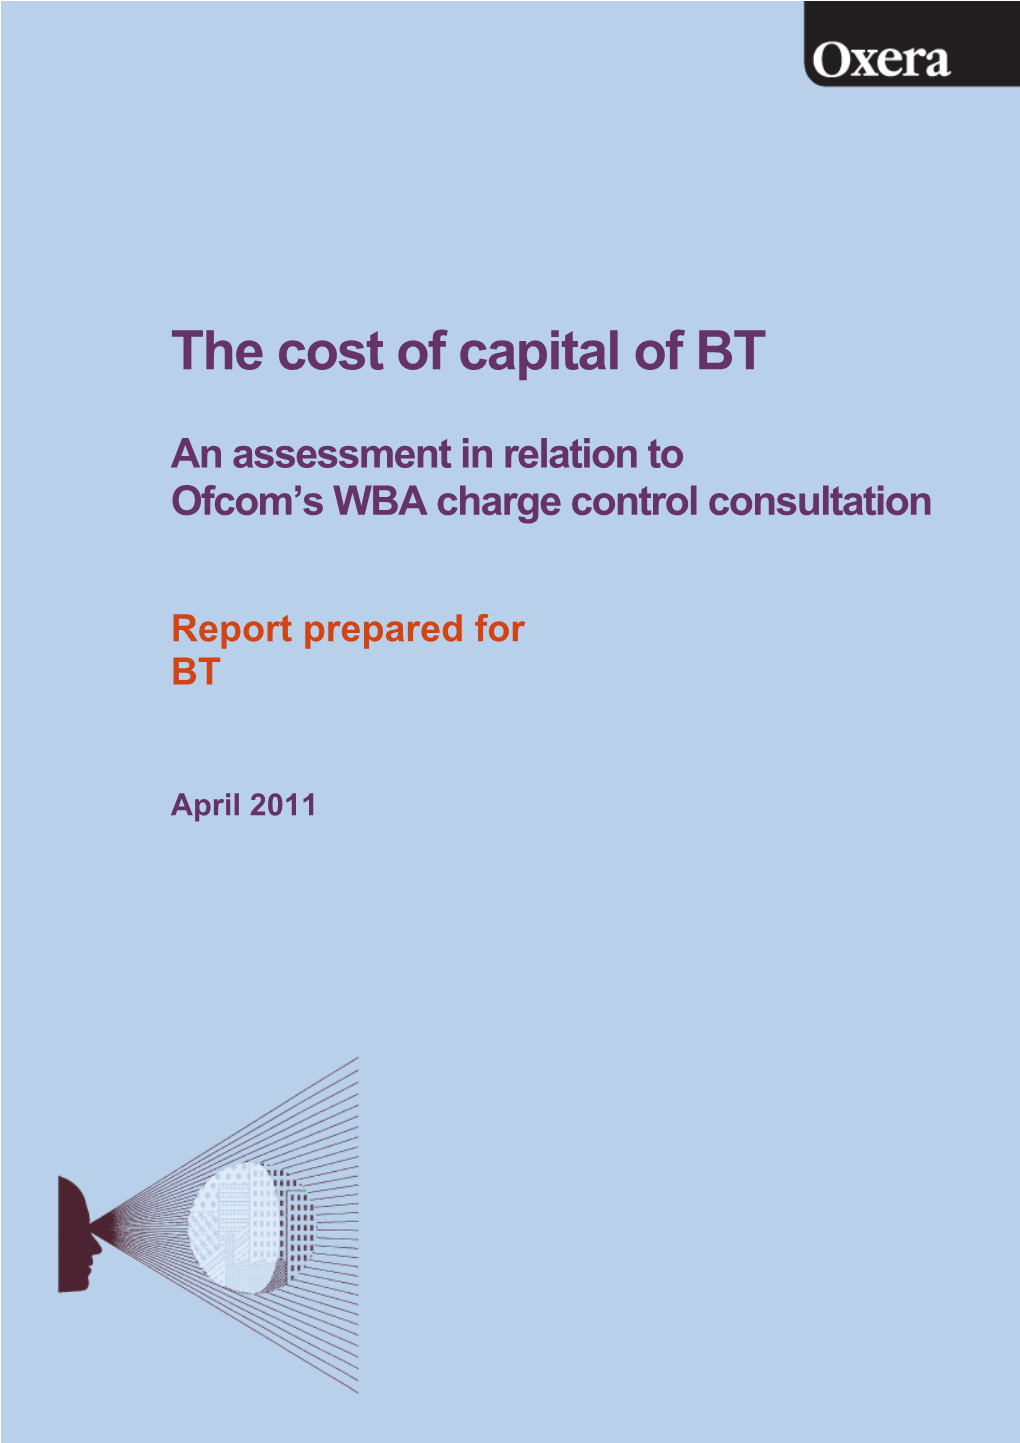 The Cost of Capital of BT